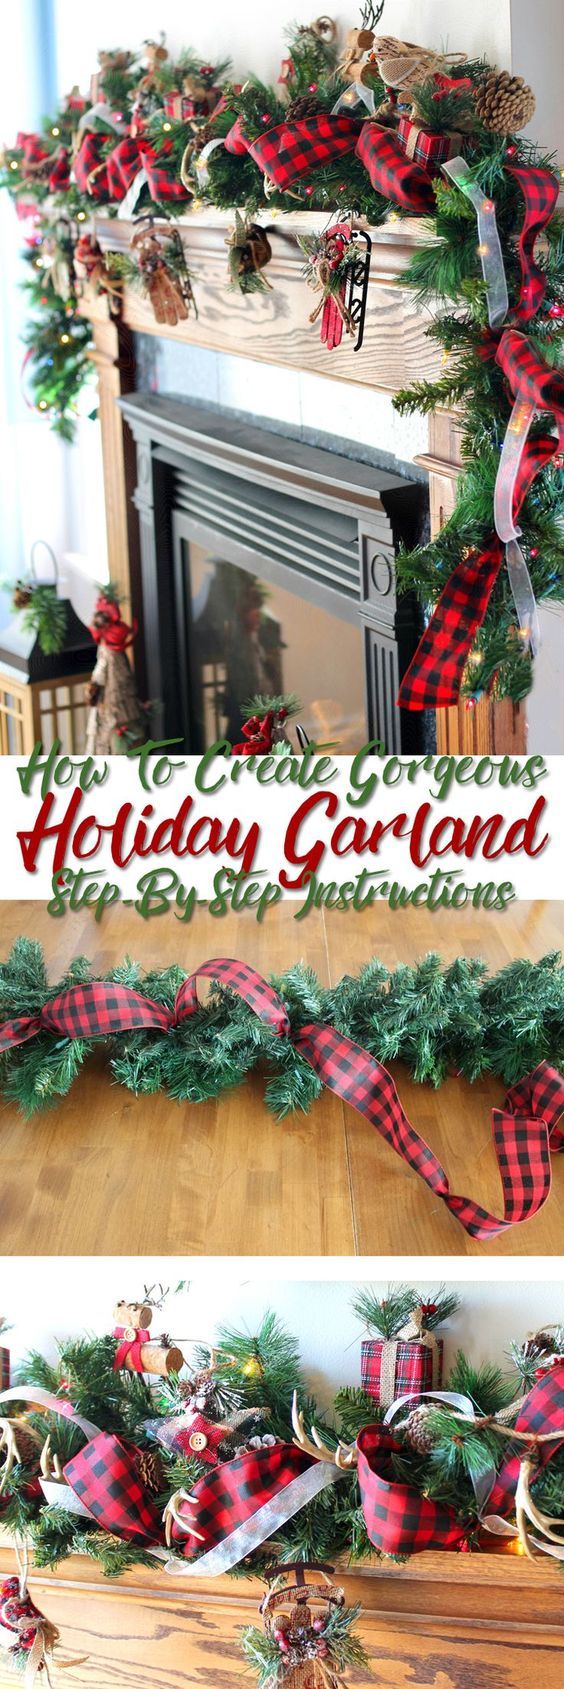 Just How To Make Holiday Garland Like A Pro